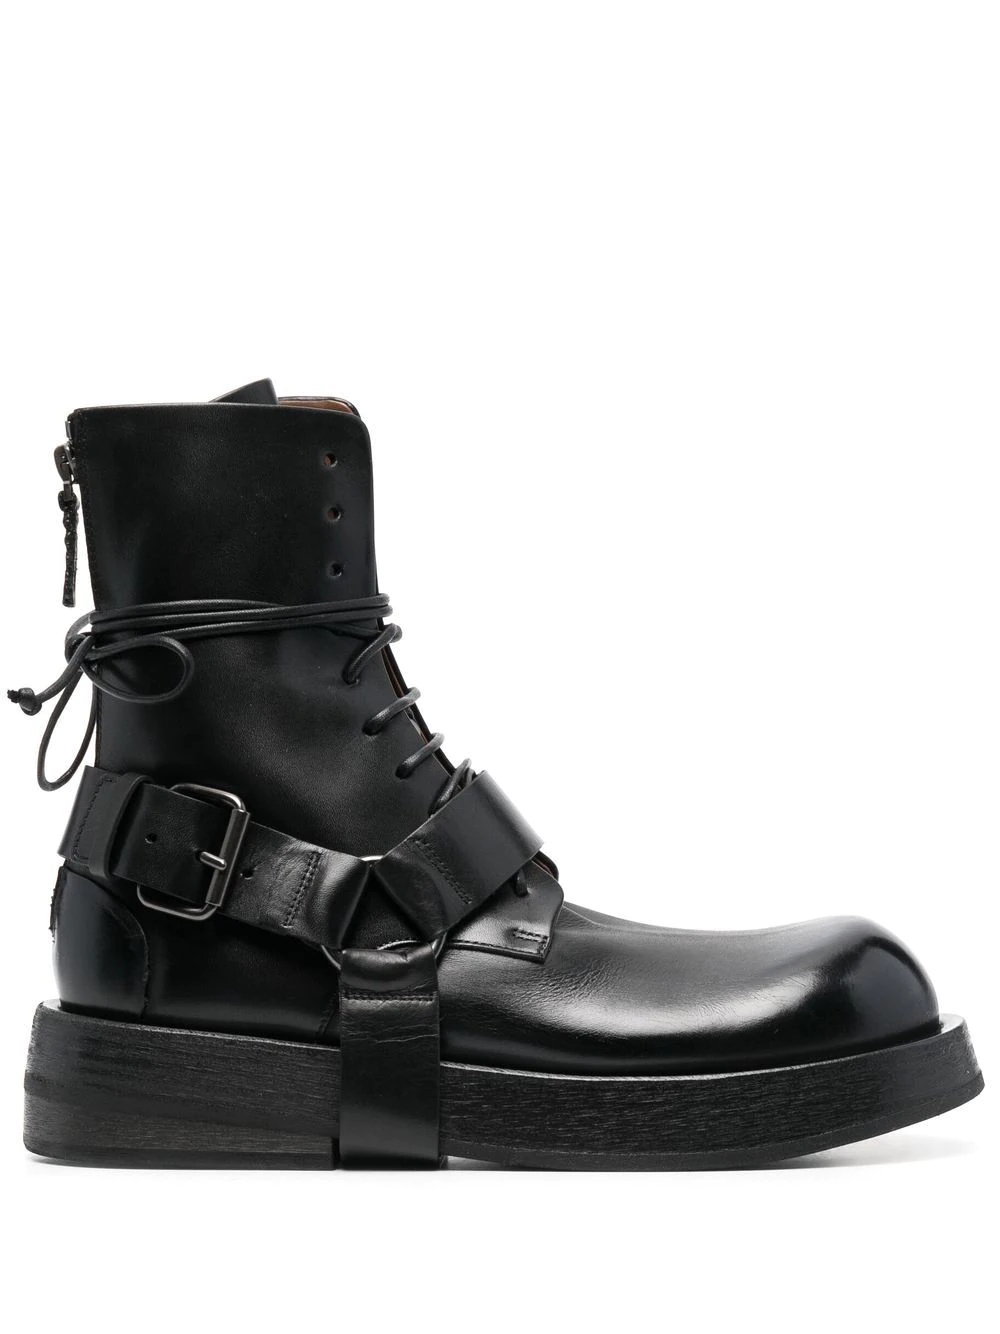 harness-style ankle leather boots - 1